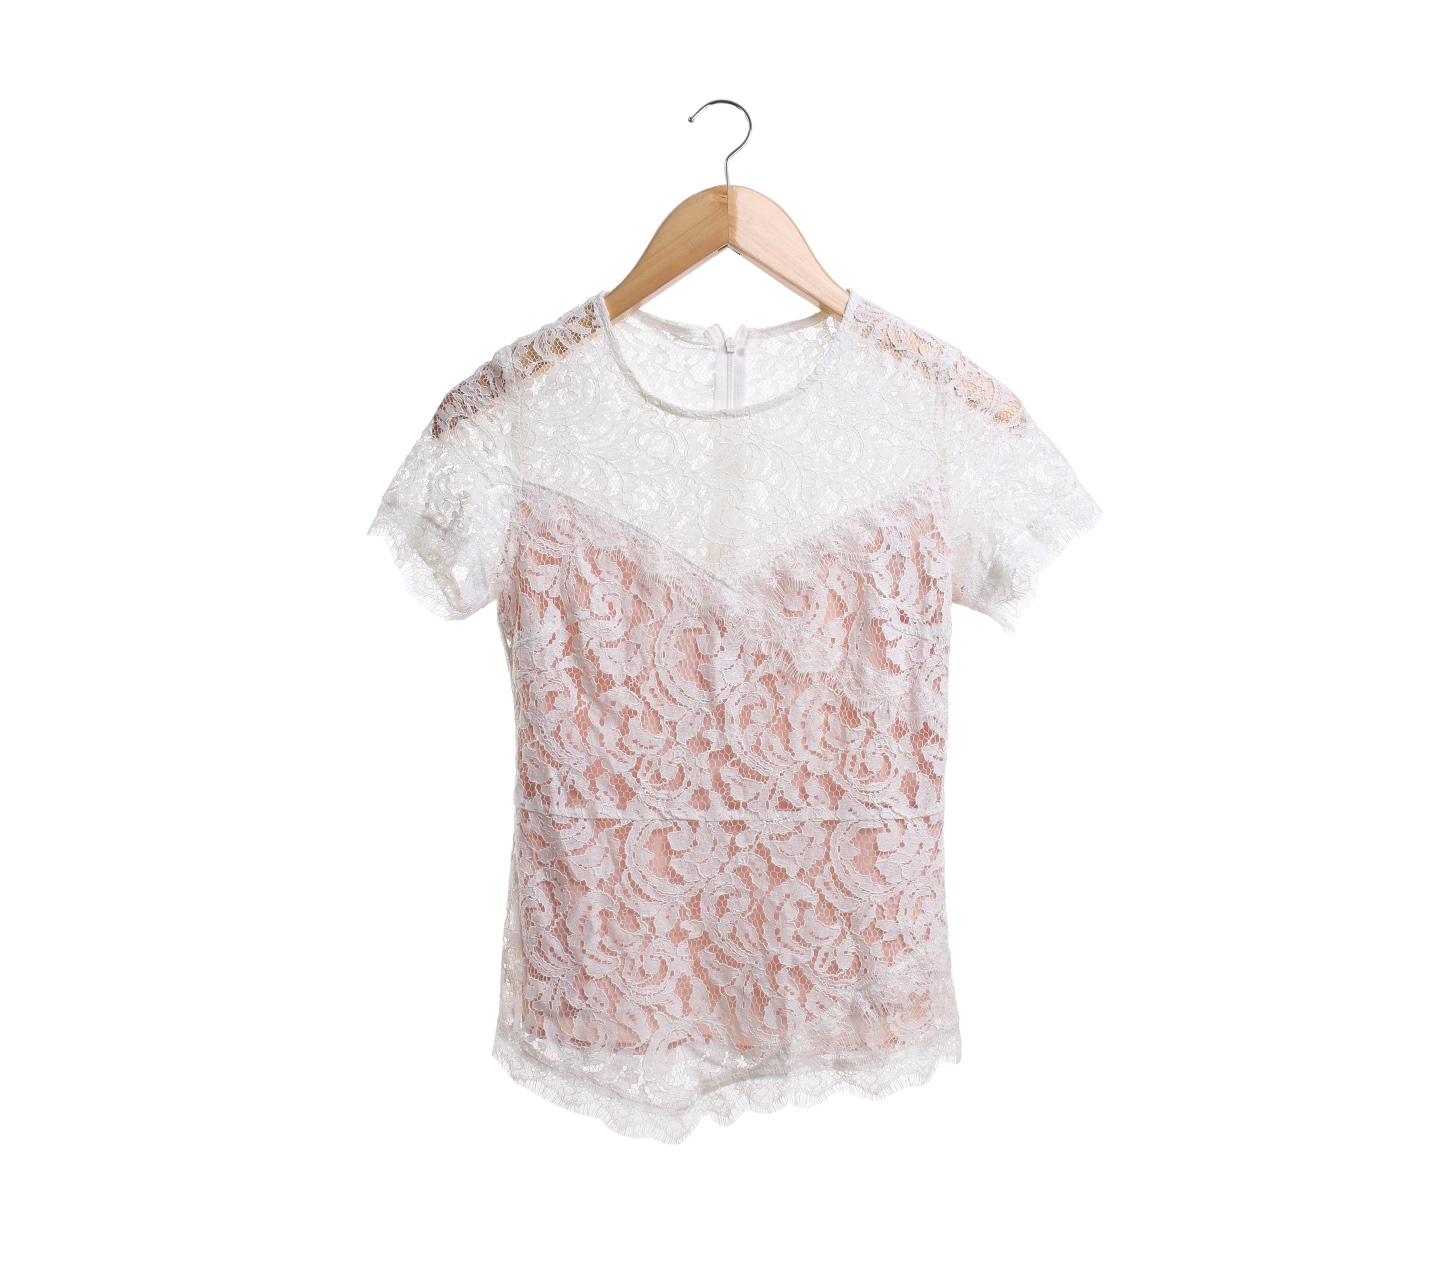 Off White And Cream Lace Blouse